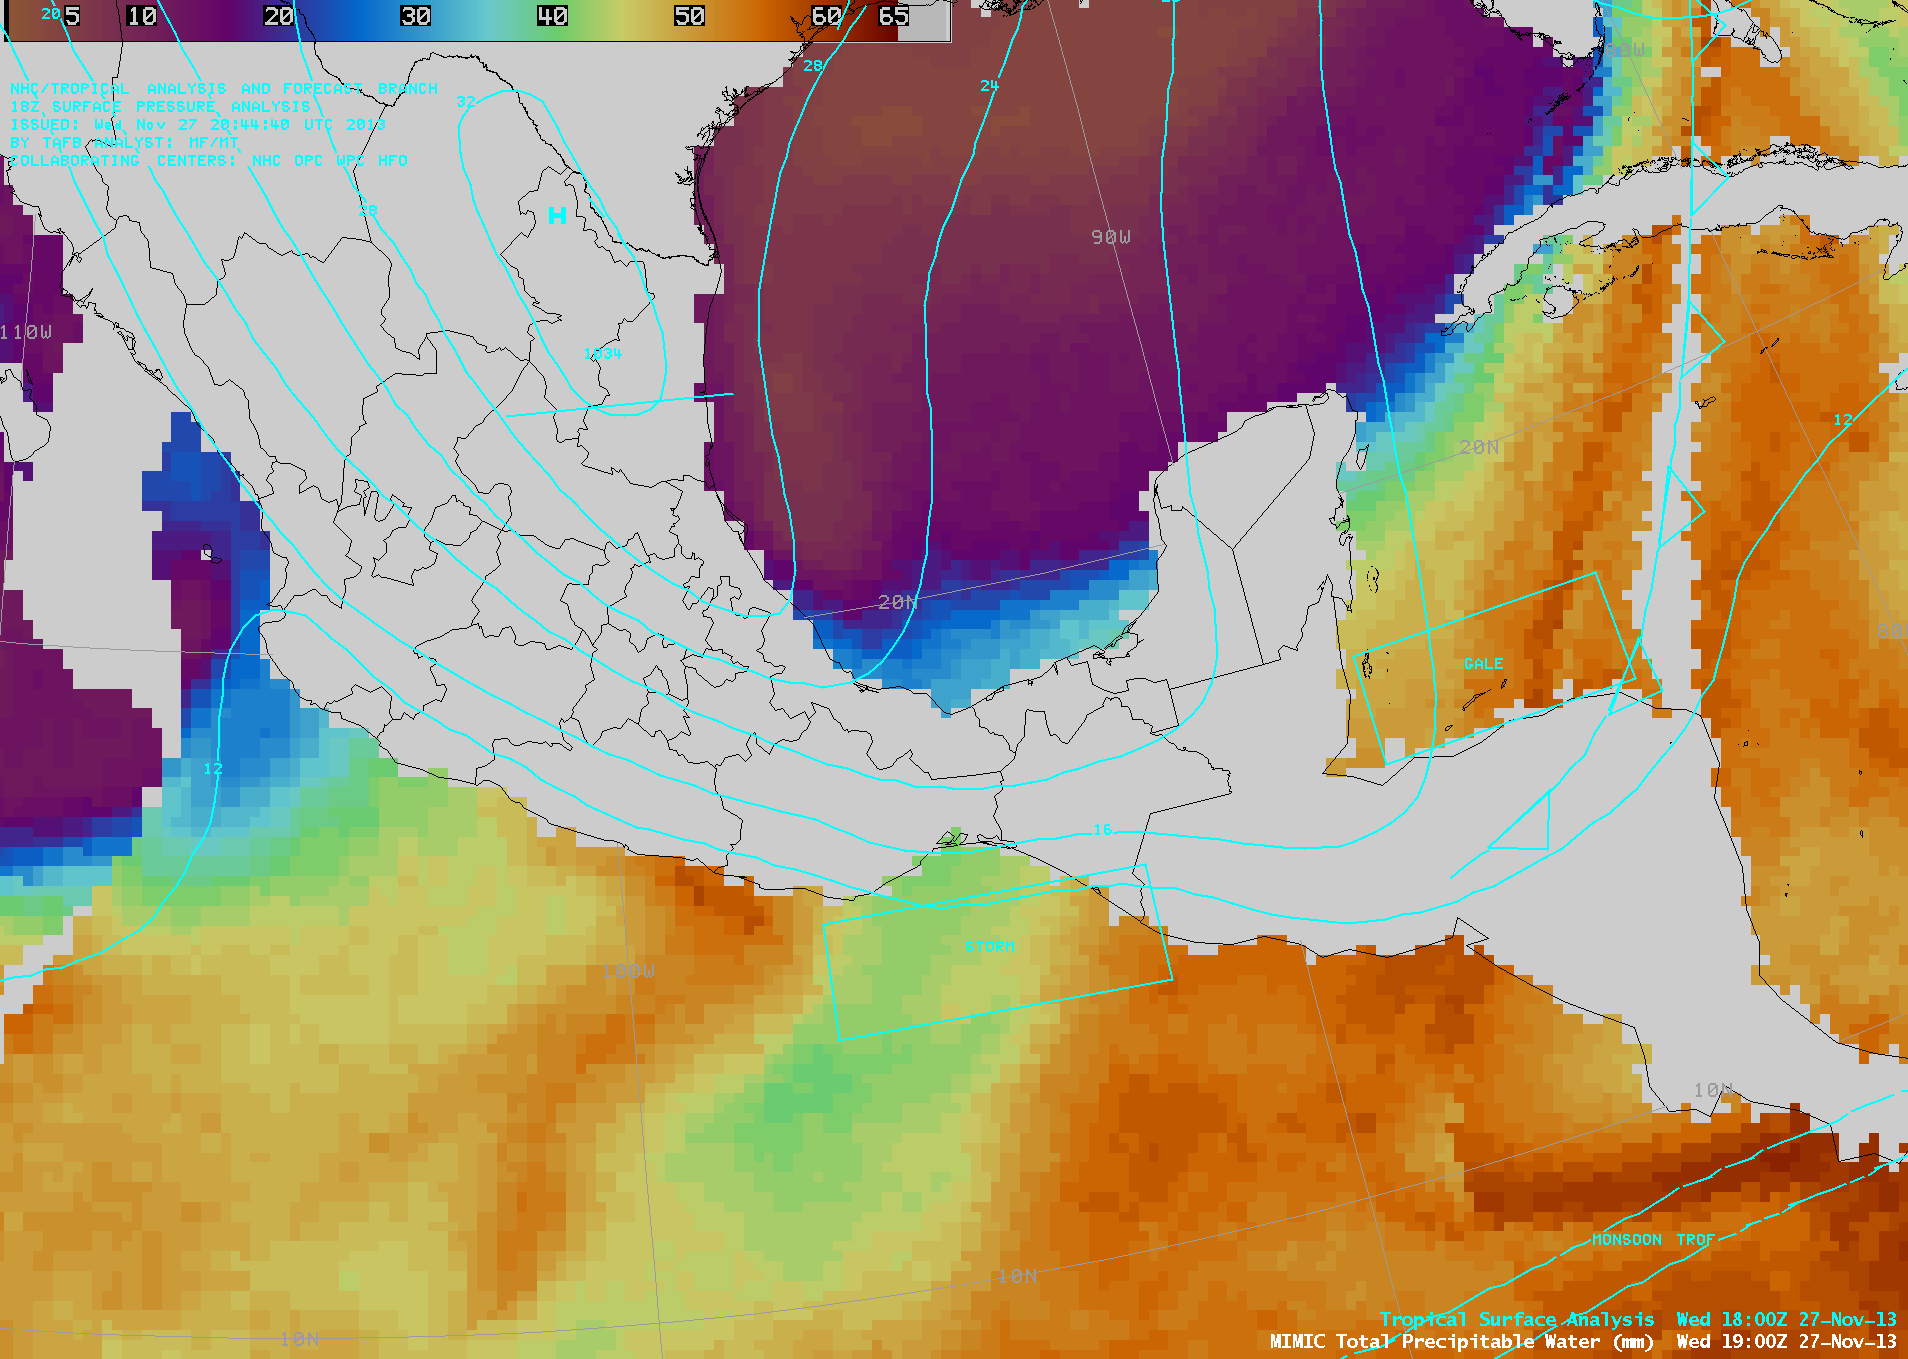 MIMIC Total Precipitable Water product, with tropical surface analysis (click to play animation)